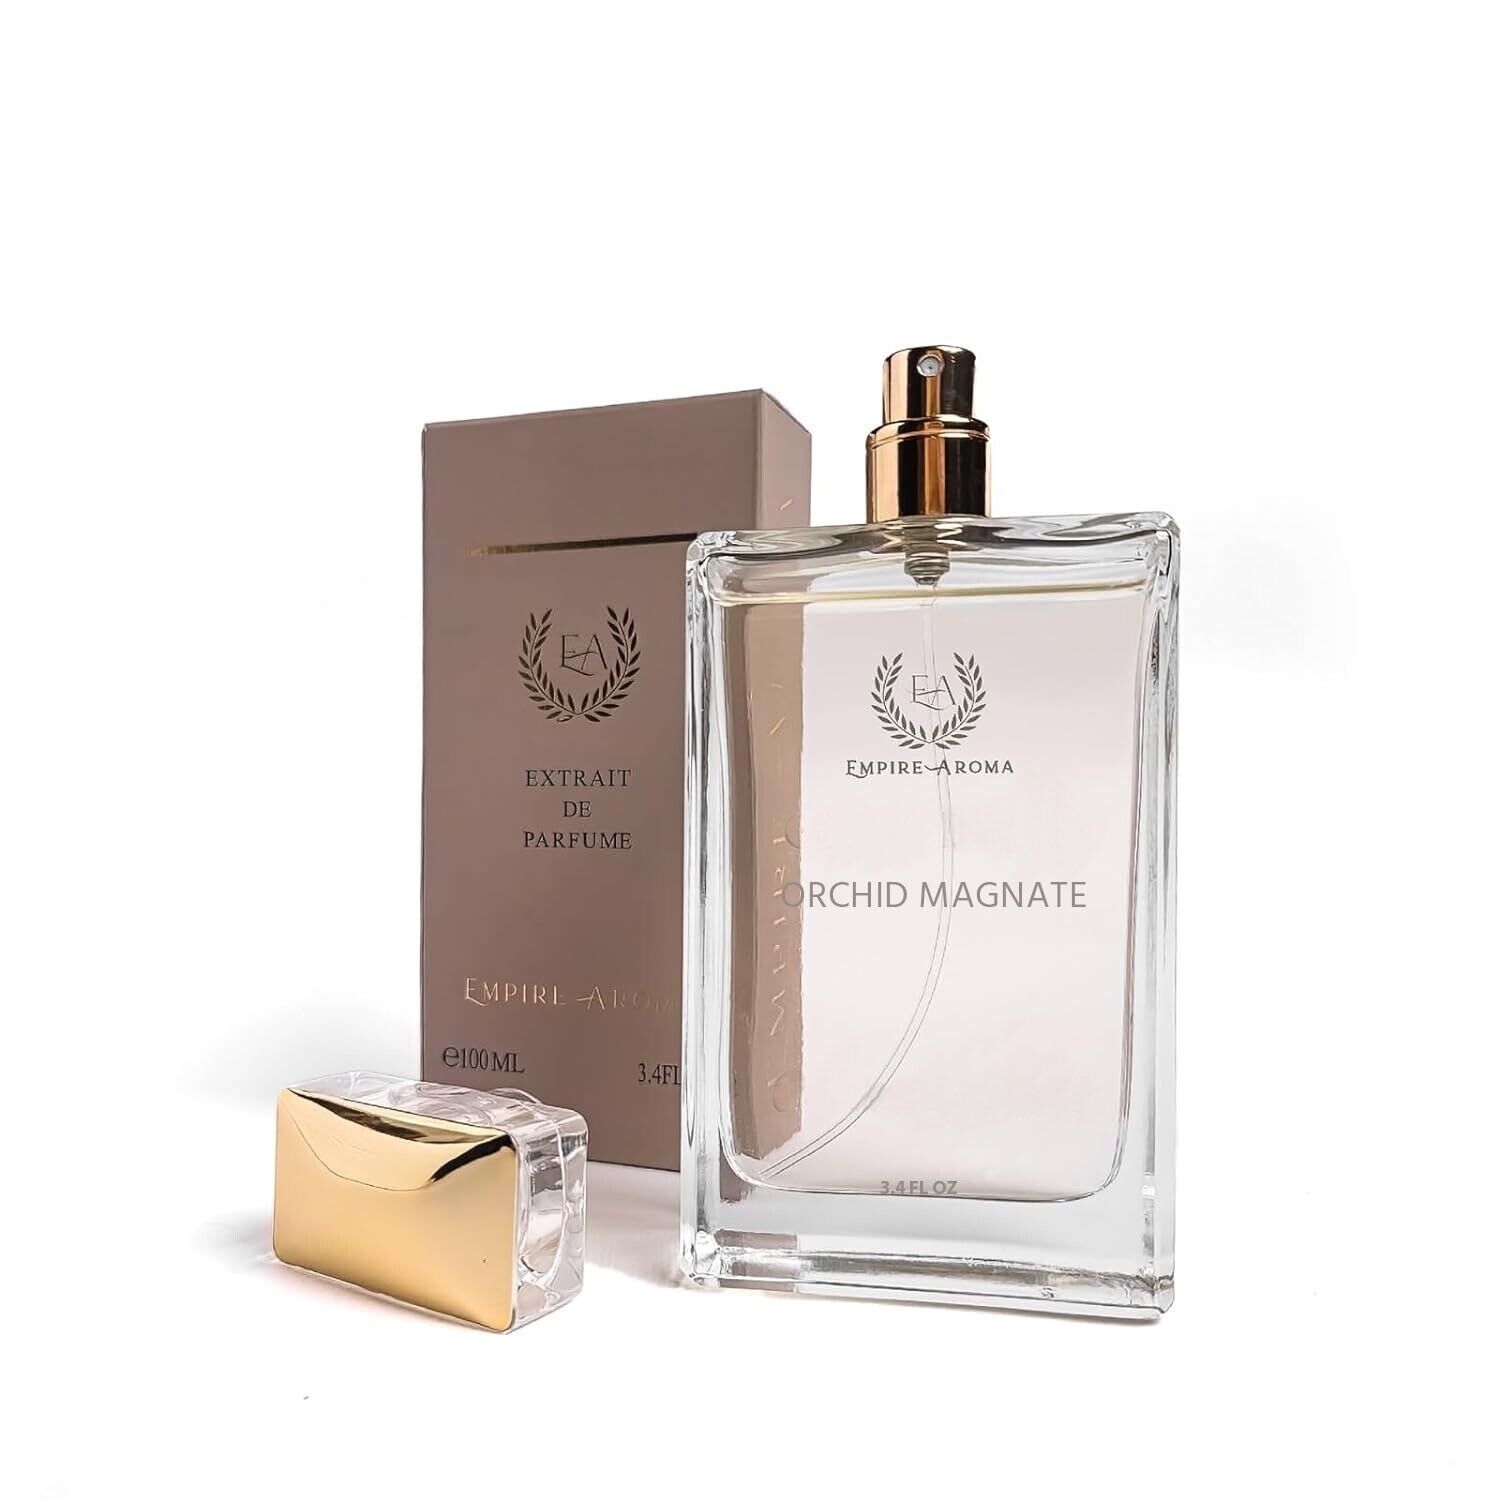 ORCHID MAGNATE inspired by TF Black Orchid 100ml unisex perfume